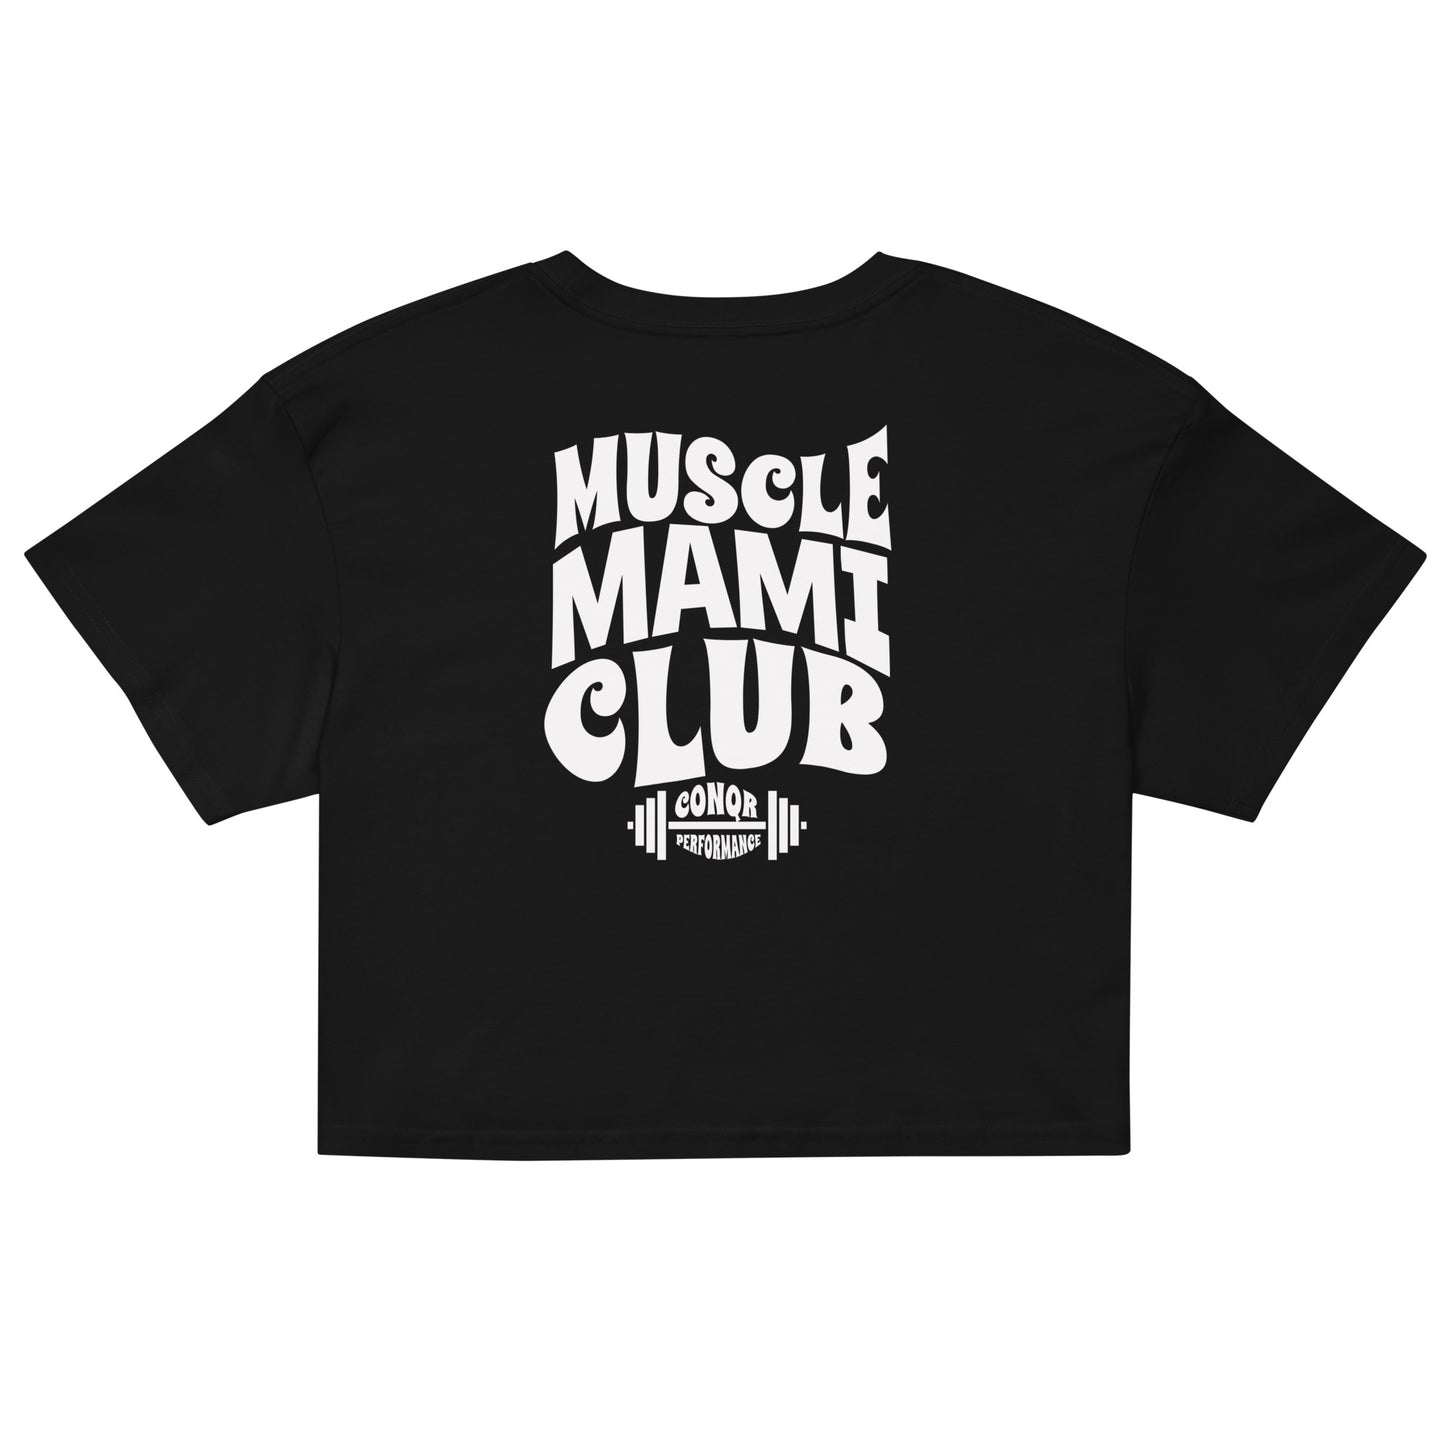 Muscle mami crop top (white)